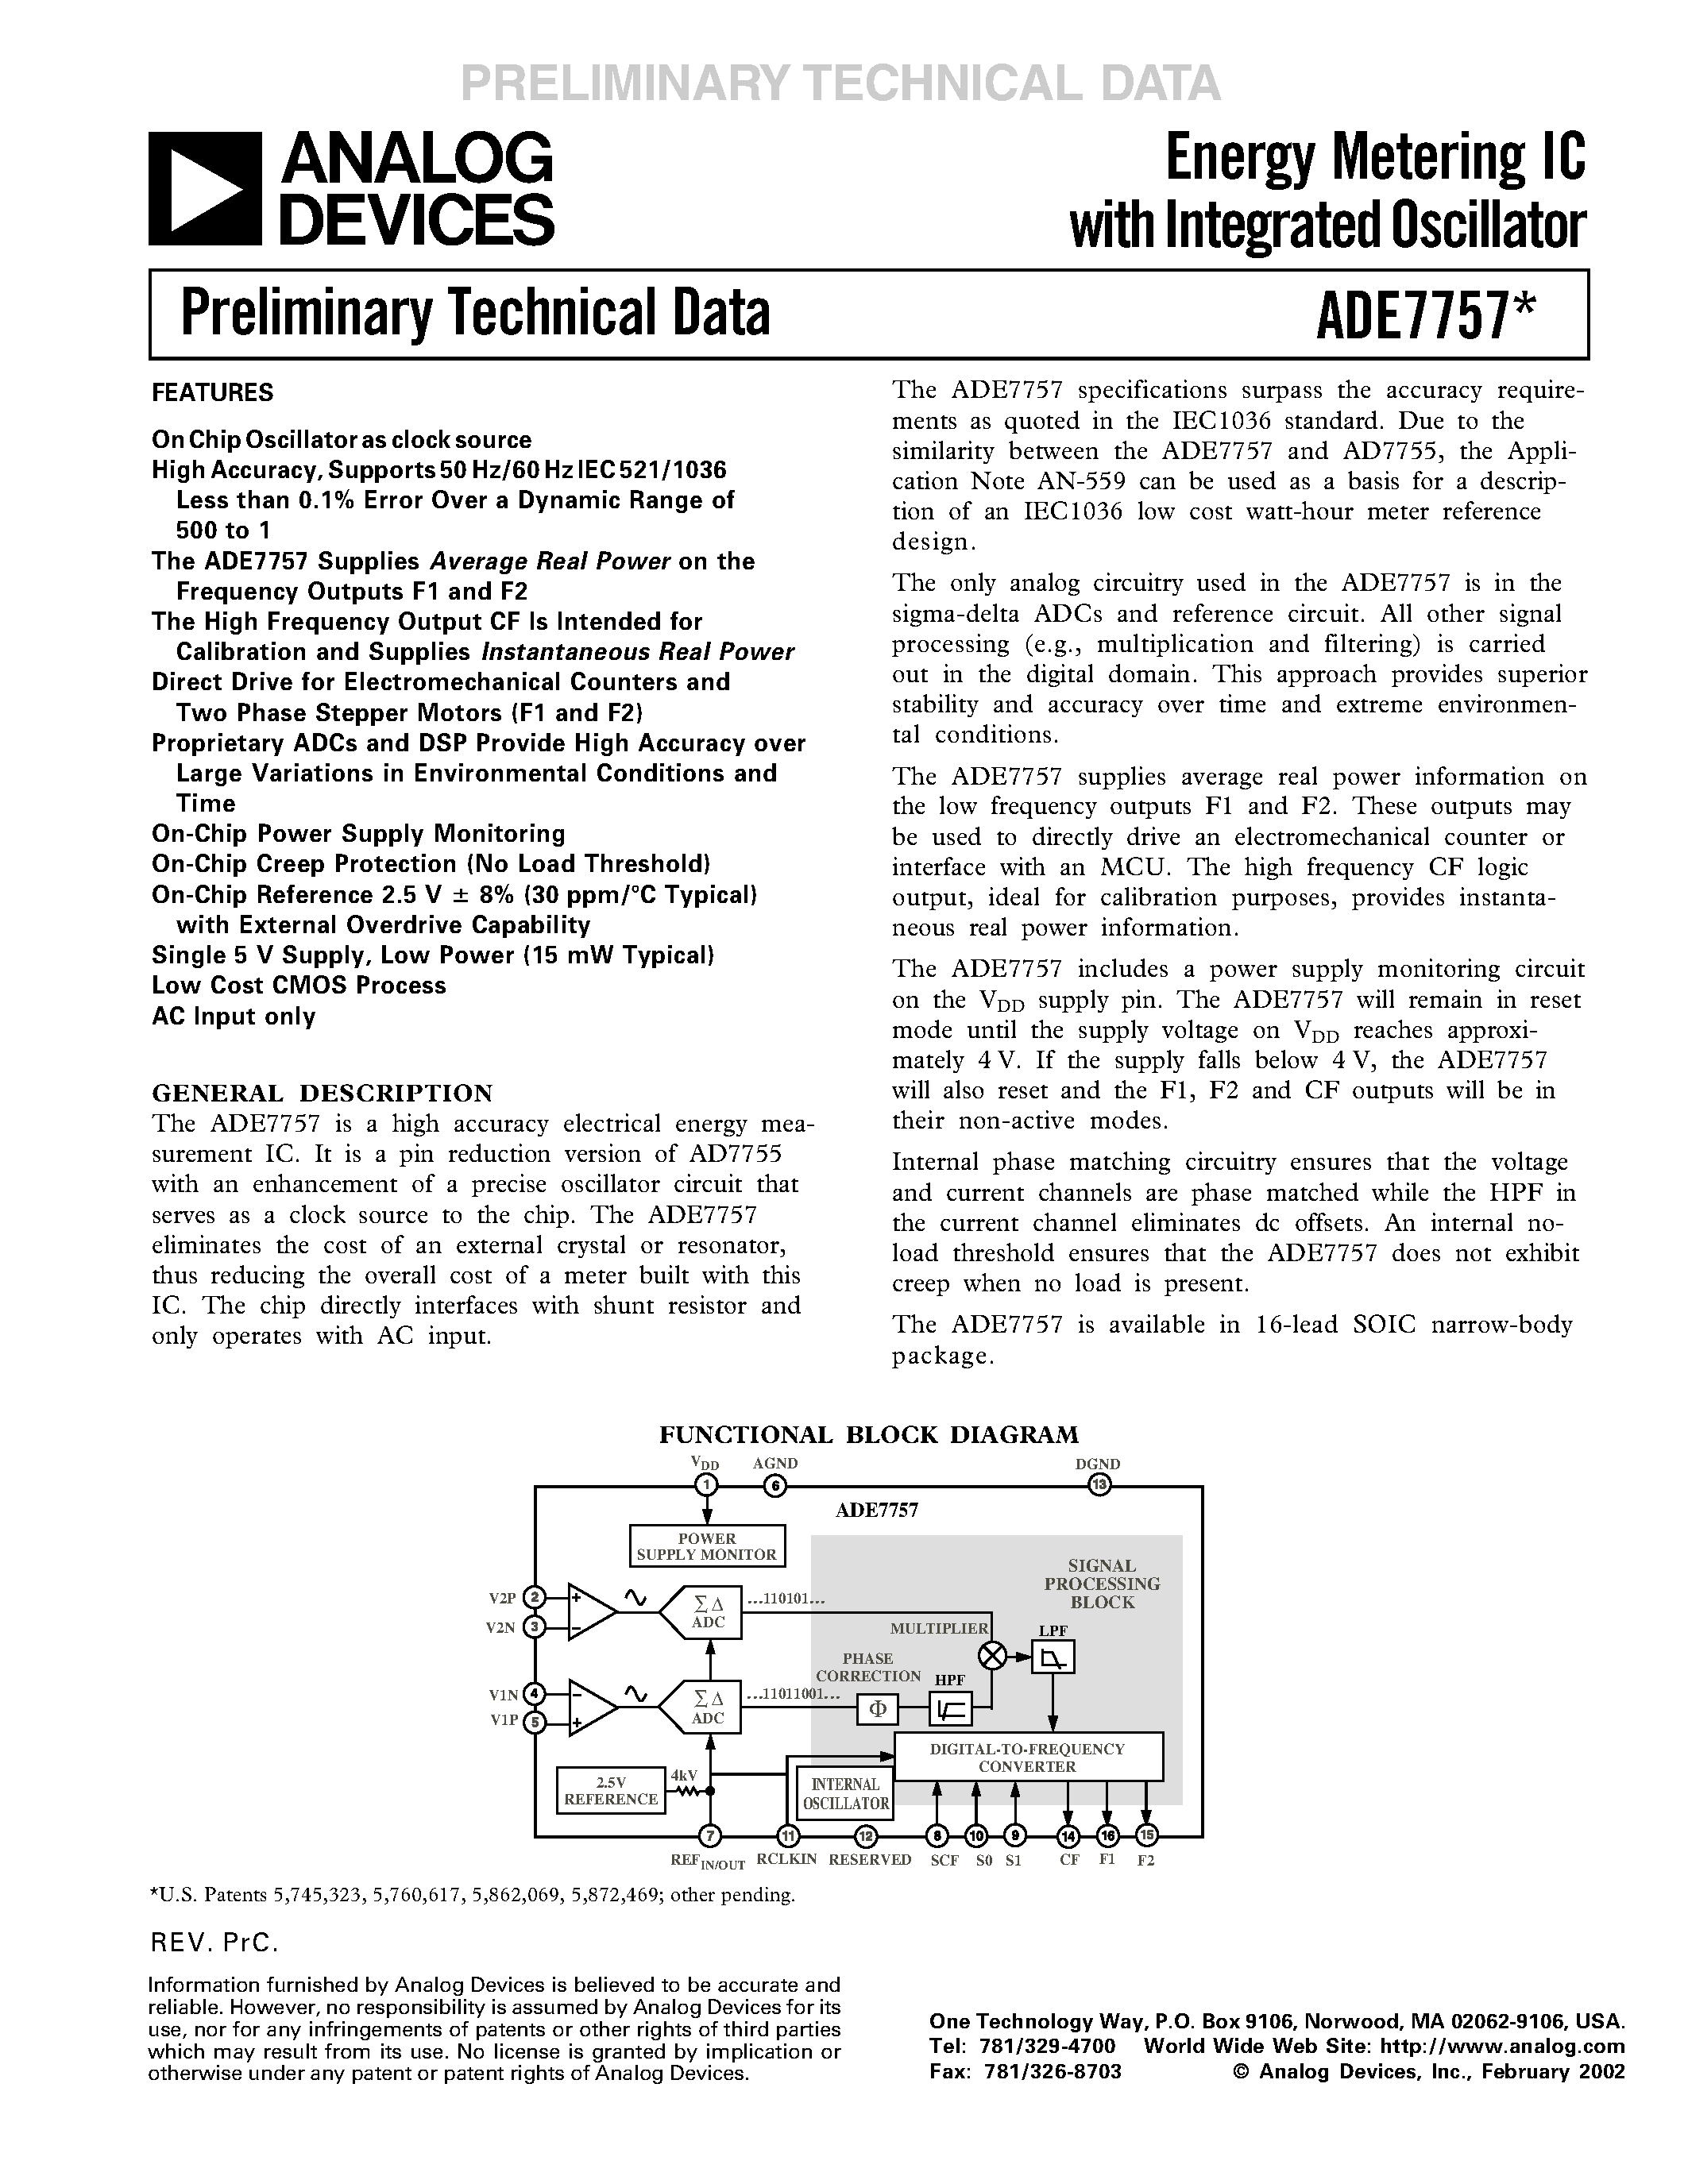 Datasheet ADE7757ARN - Energy Metering IC with Integrated Oscillator page 1